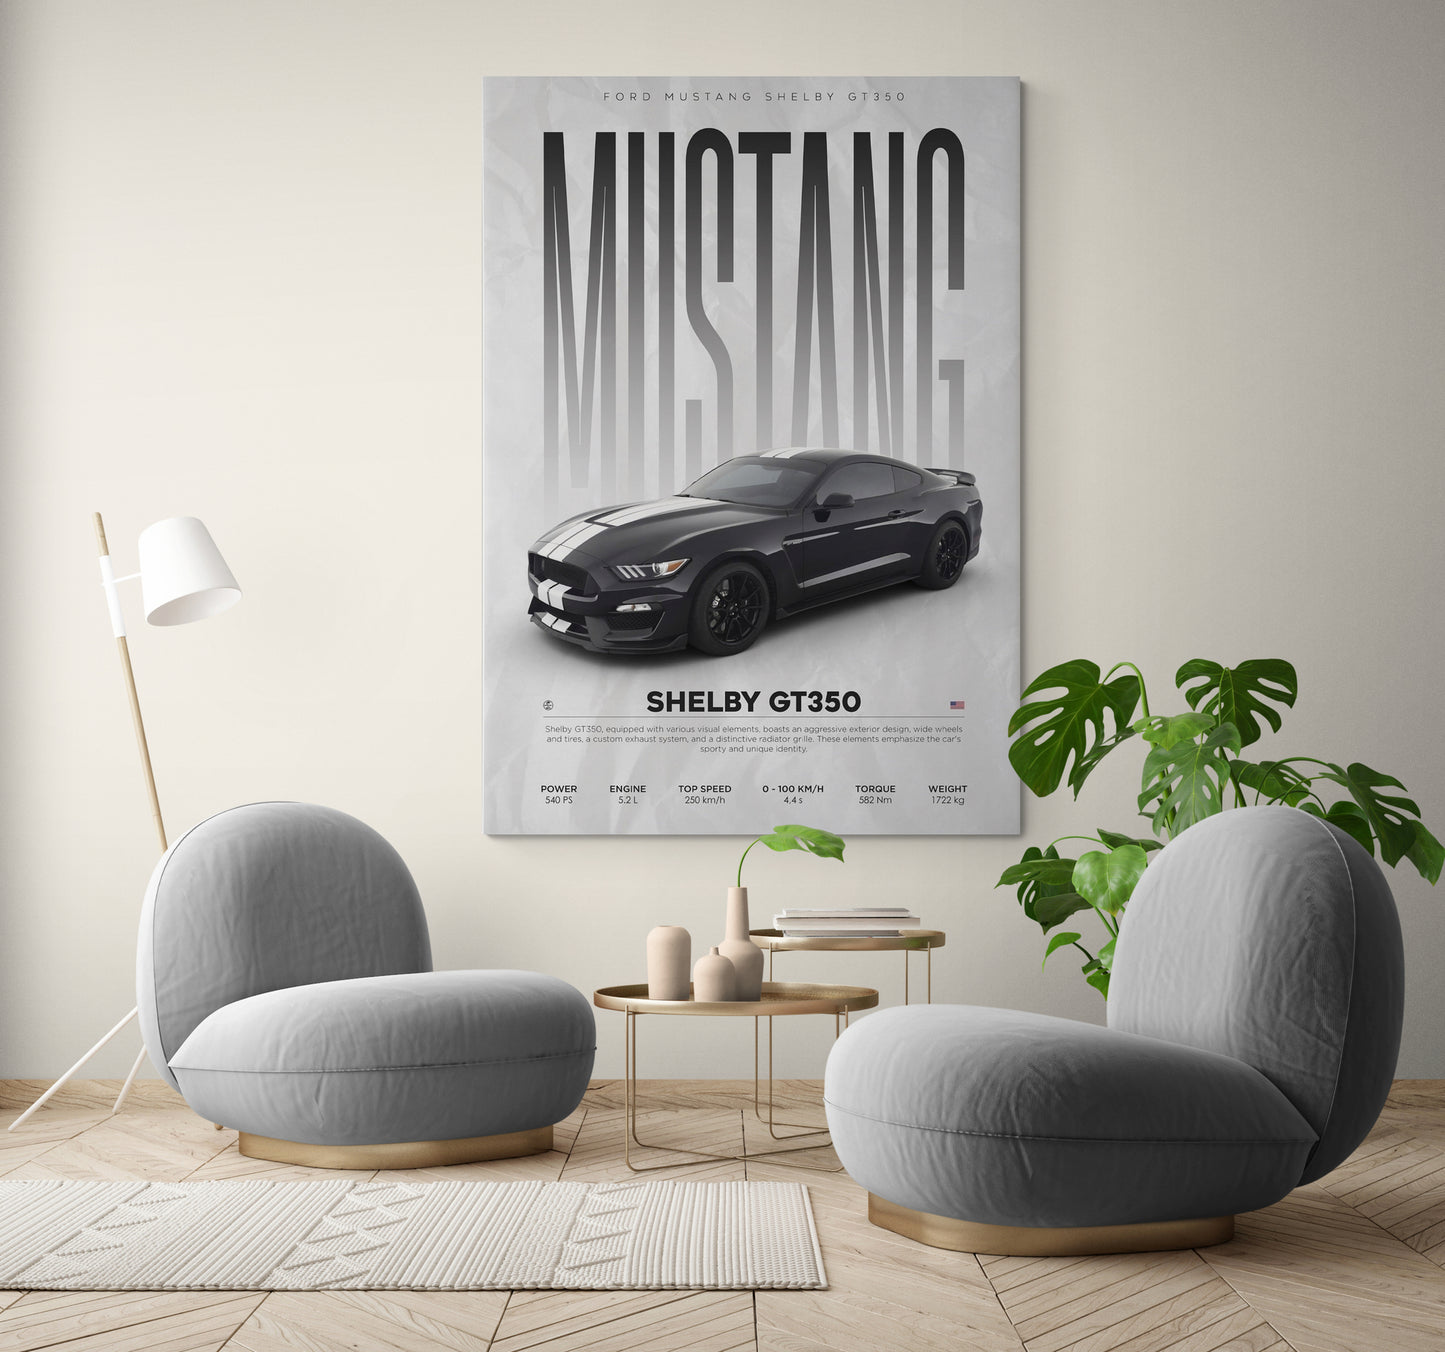  Enhance your interior design for home with our Mustang 2024 canvas painting, a perfect addition to your house decor ideas. Capture the essence of the Ford Mustang GT500 with this stunning wall painting canvas from Essential Walls.